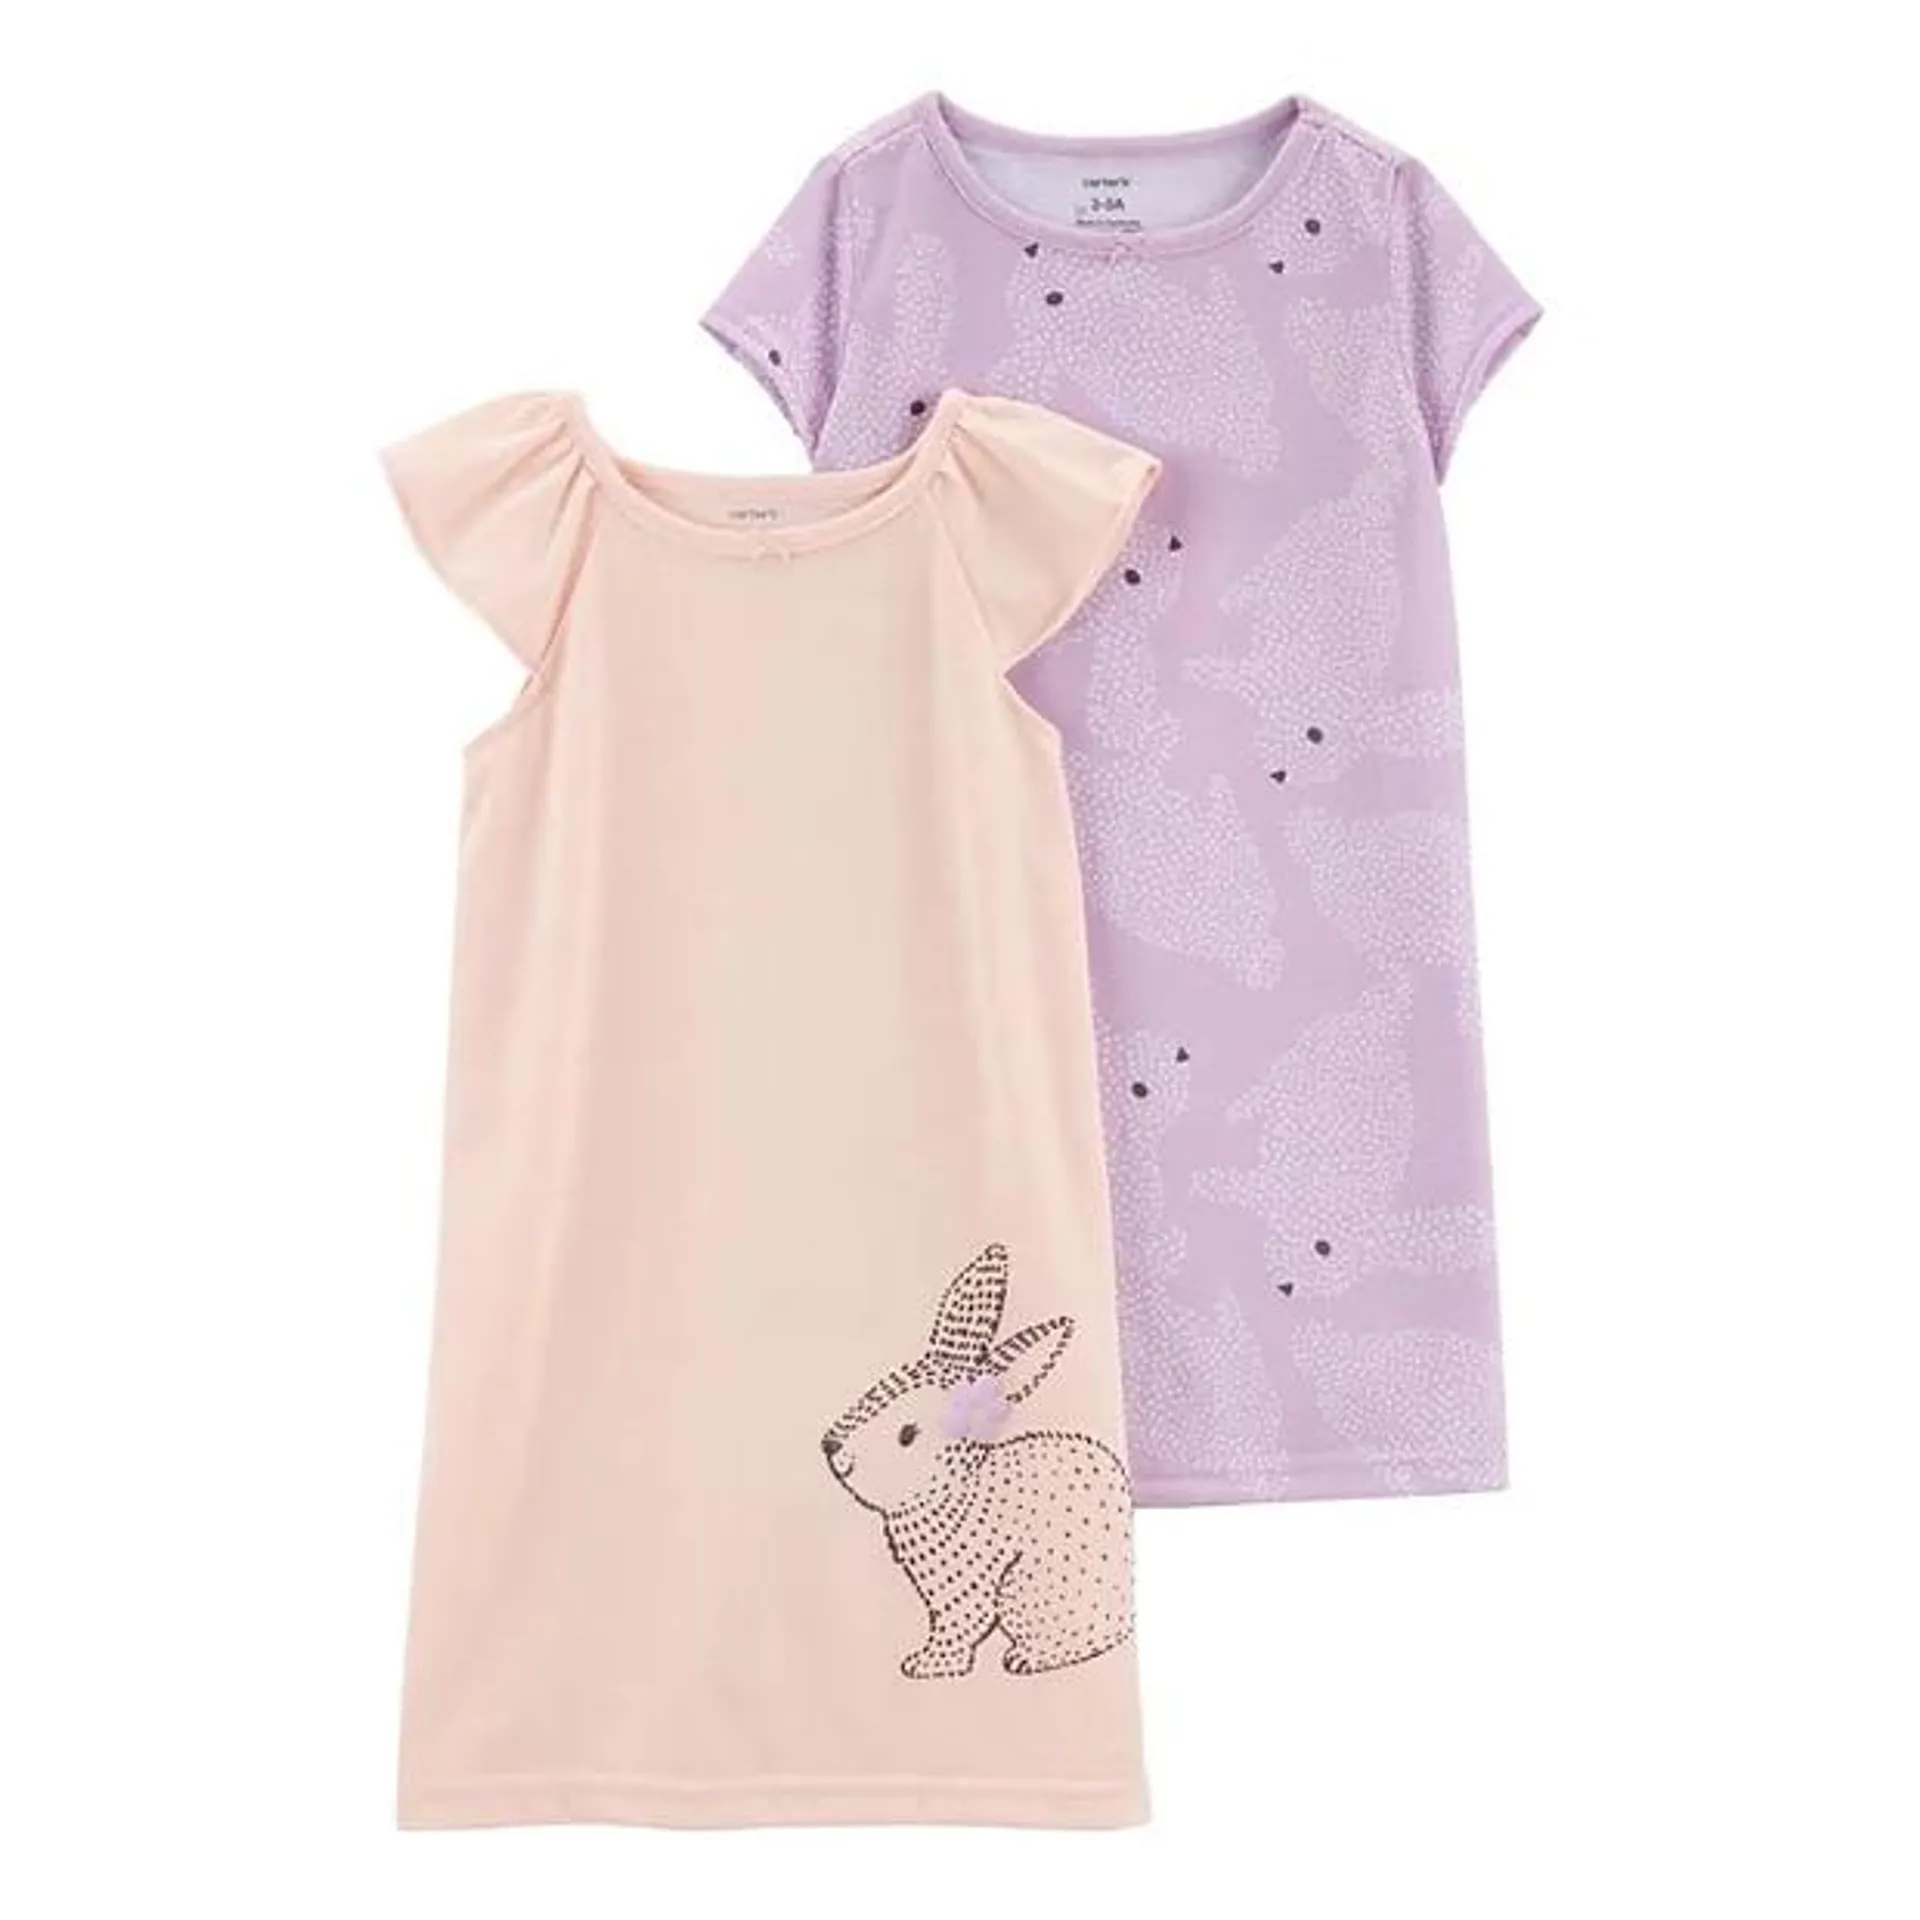 Girls 4-12 Carter's 2-Pack Bunny Nightgowns